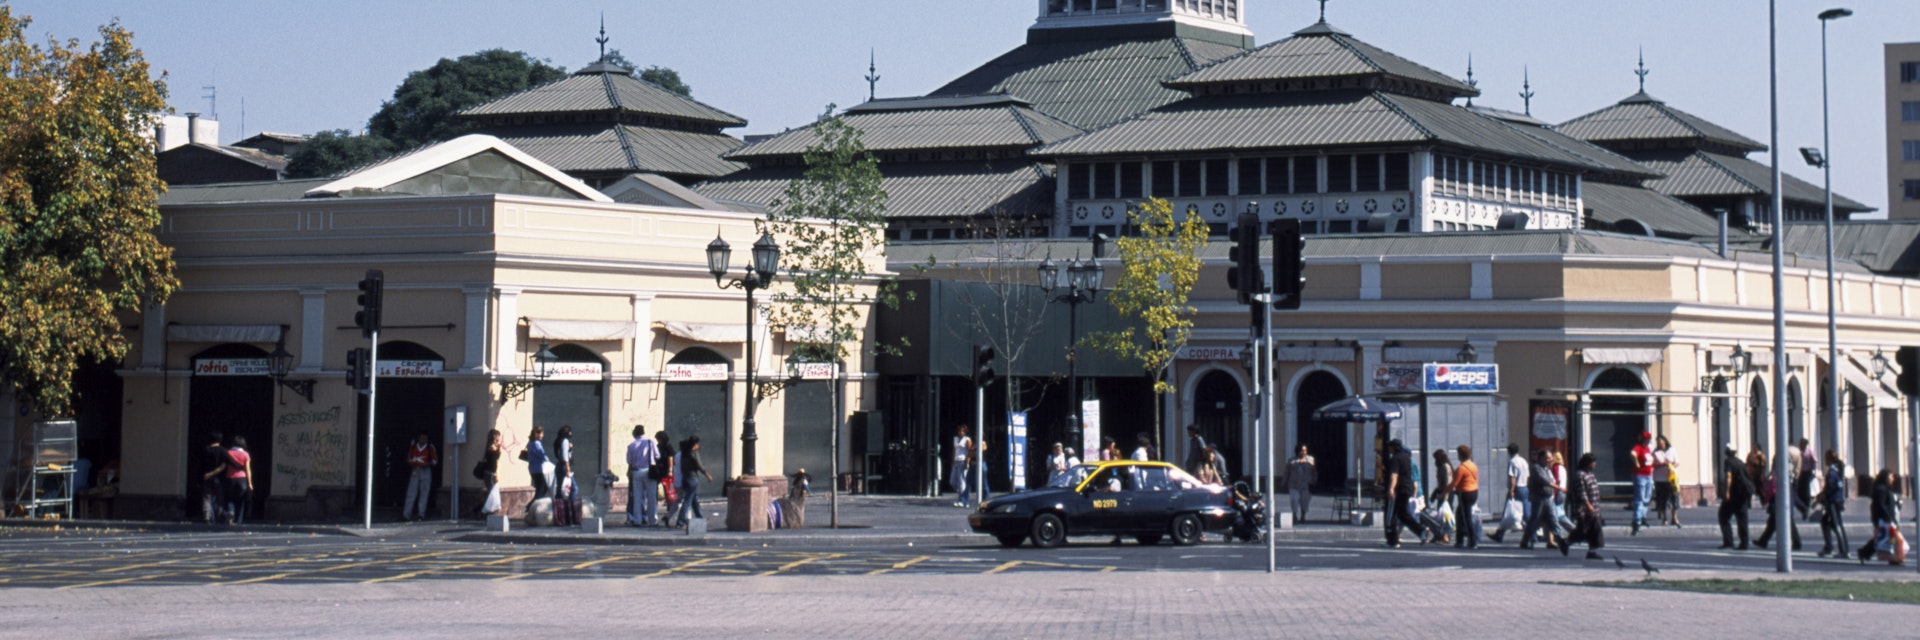 Chile, Santiago. The Mercado Central houses a picturesque fruit, vegetable and fish market together with a large number of small sea-food restaurants. The metal structure was prefabricated in England and erected in Santiago in 1868AD.